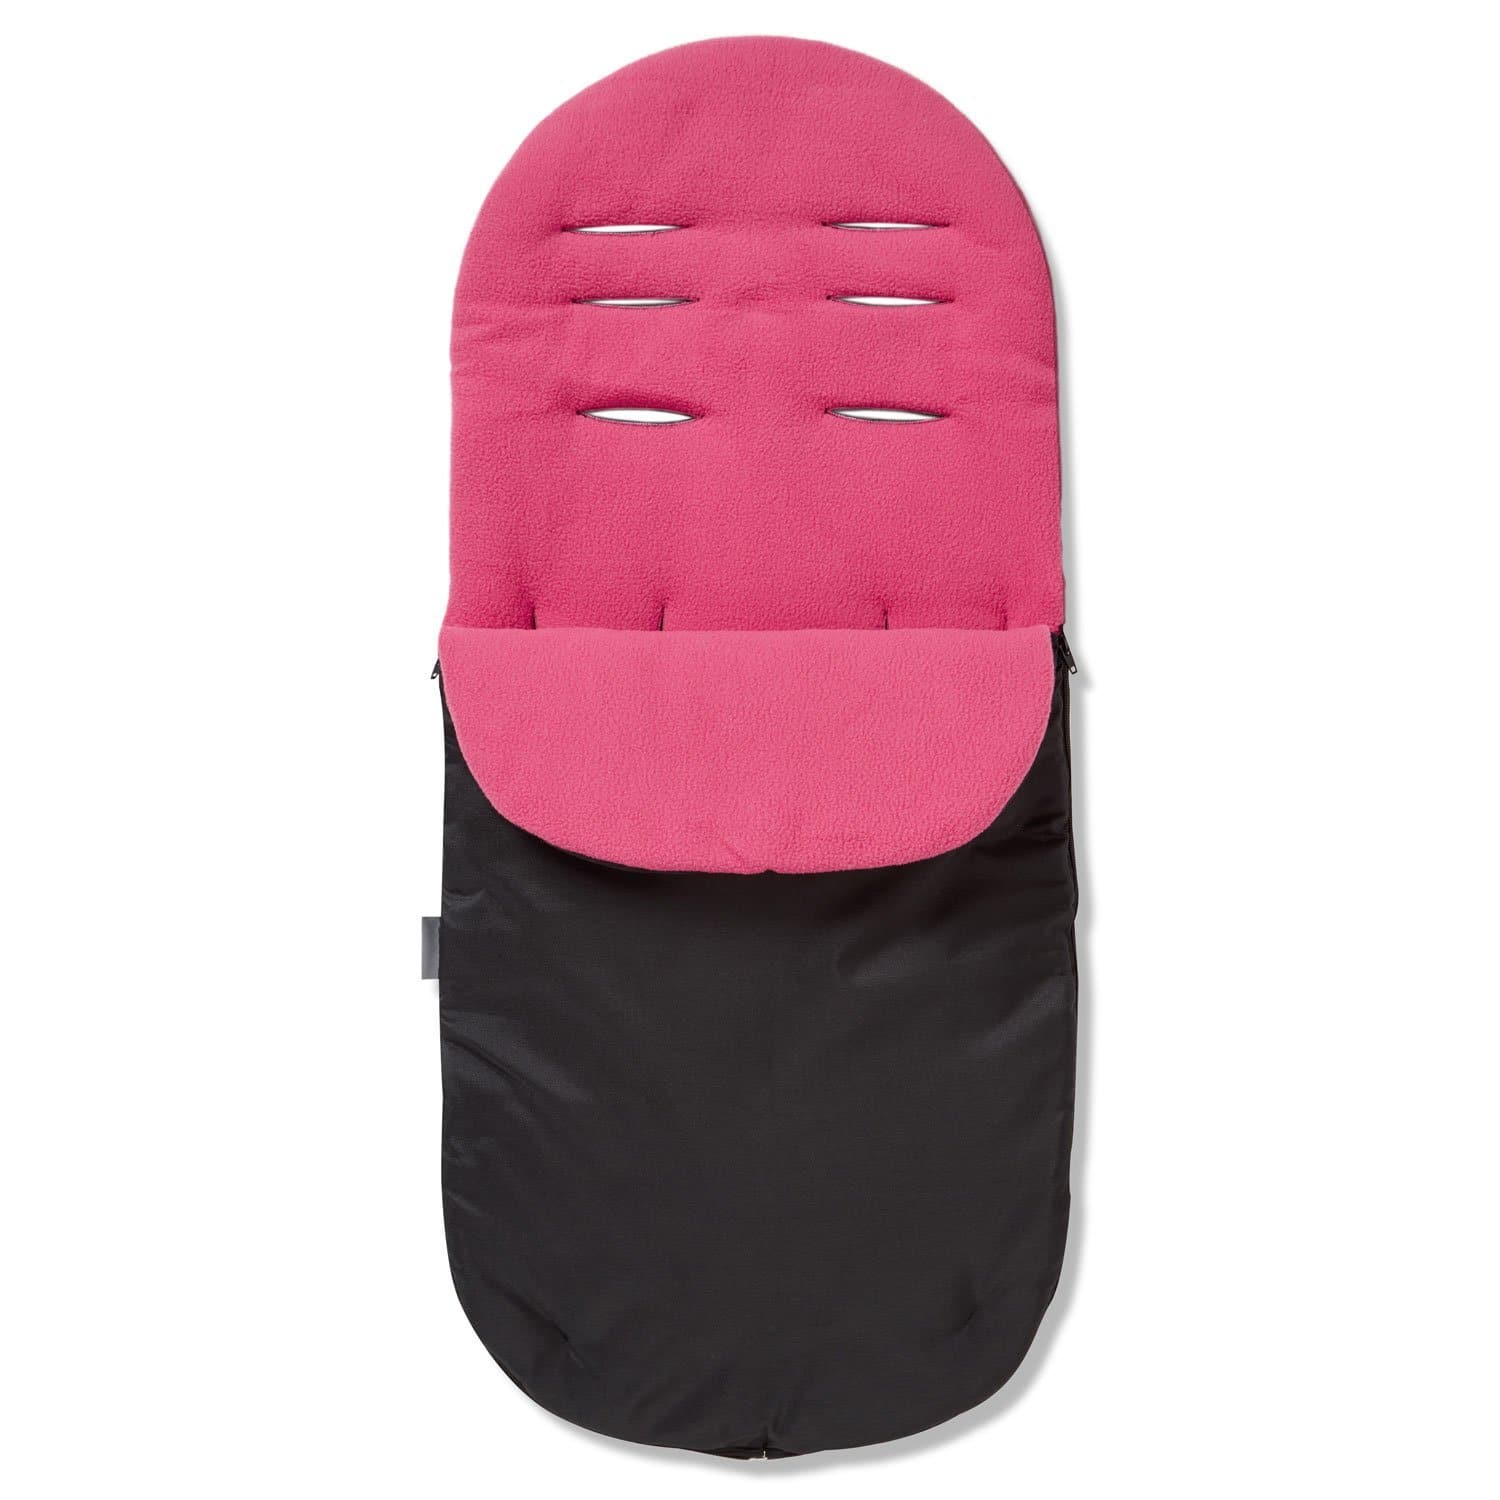 Footmuff / Cosy Toes Compatible with Baby Trend - For Your Little One